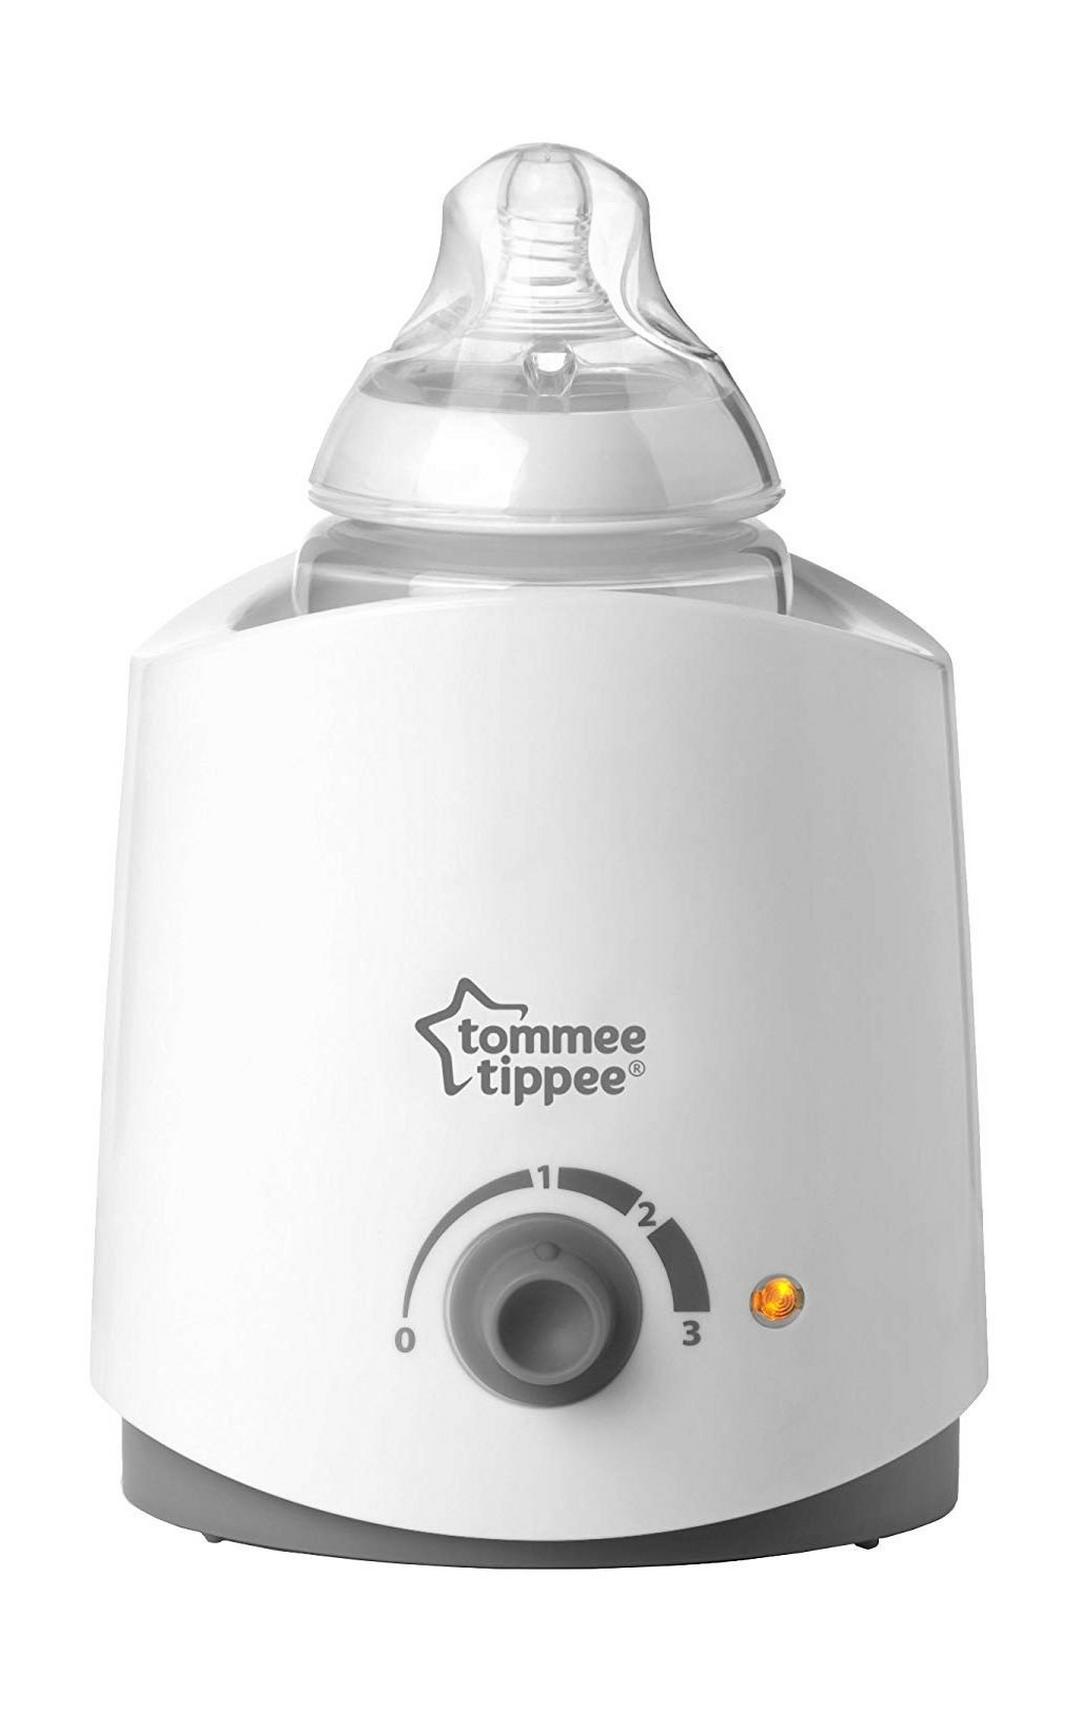 Tommee Tippee Closer To Nature Electric Bottle and Food Warmer